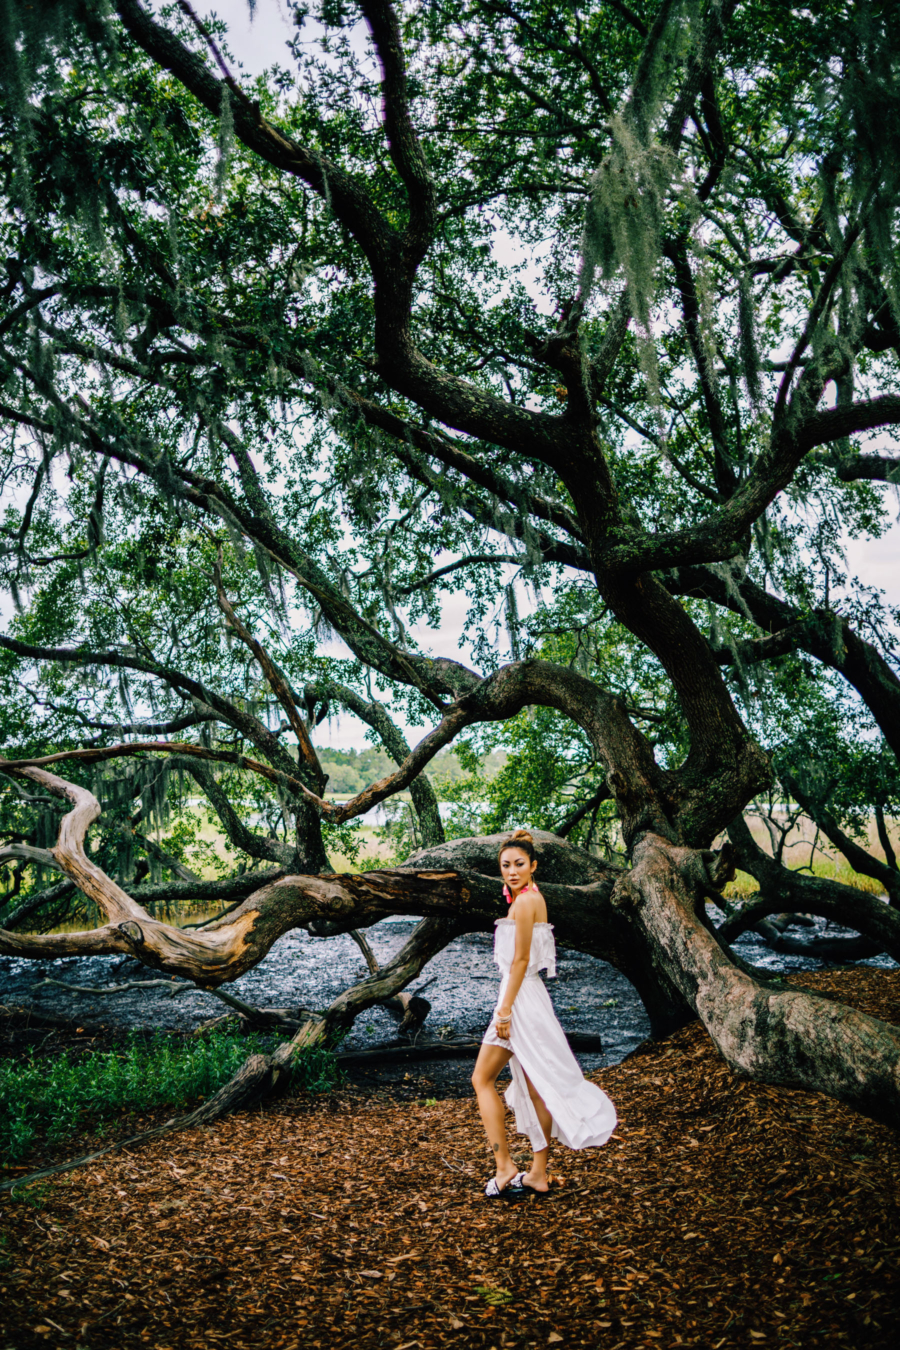 Boone's Plantation - Travel Guide: 36 hours in Charleston, SC // NotJessFashion.com